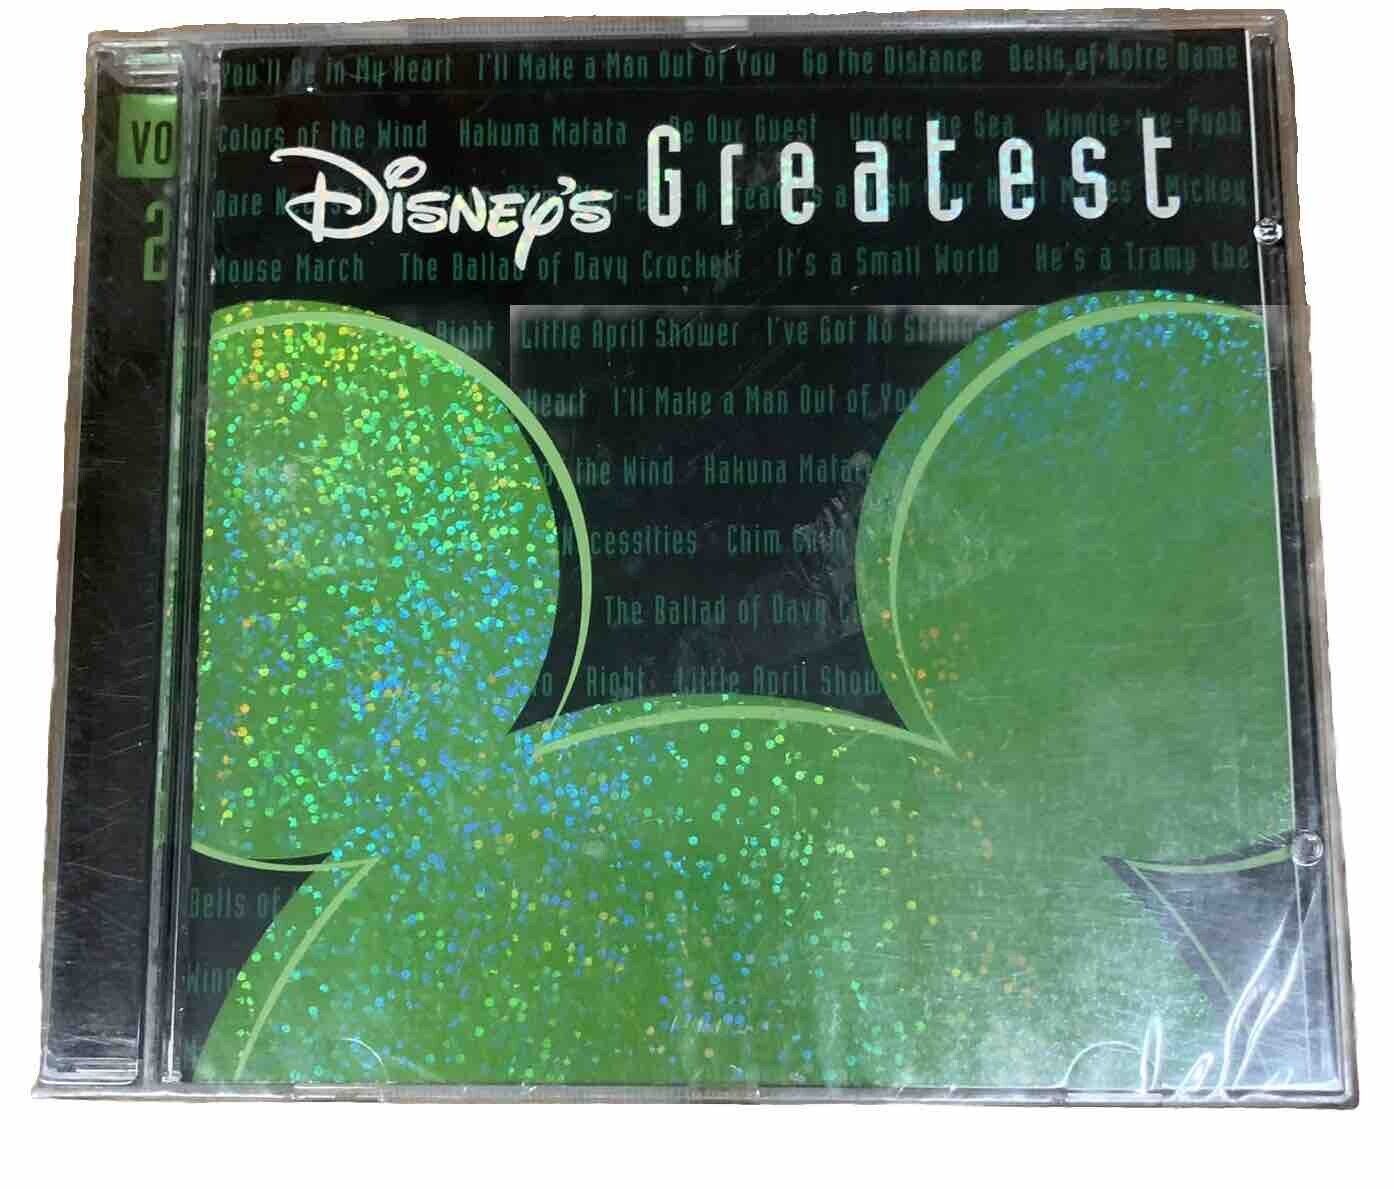 Disney\'s 2001 Greatest Vol. 2 by Various Artists Factory Sealed